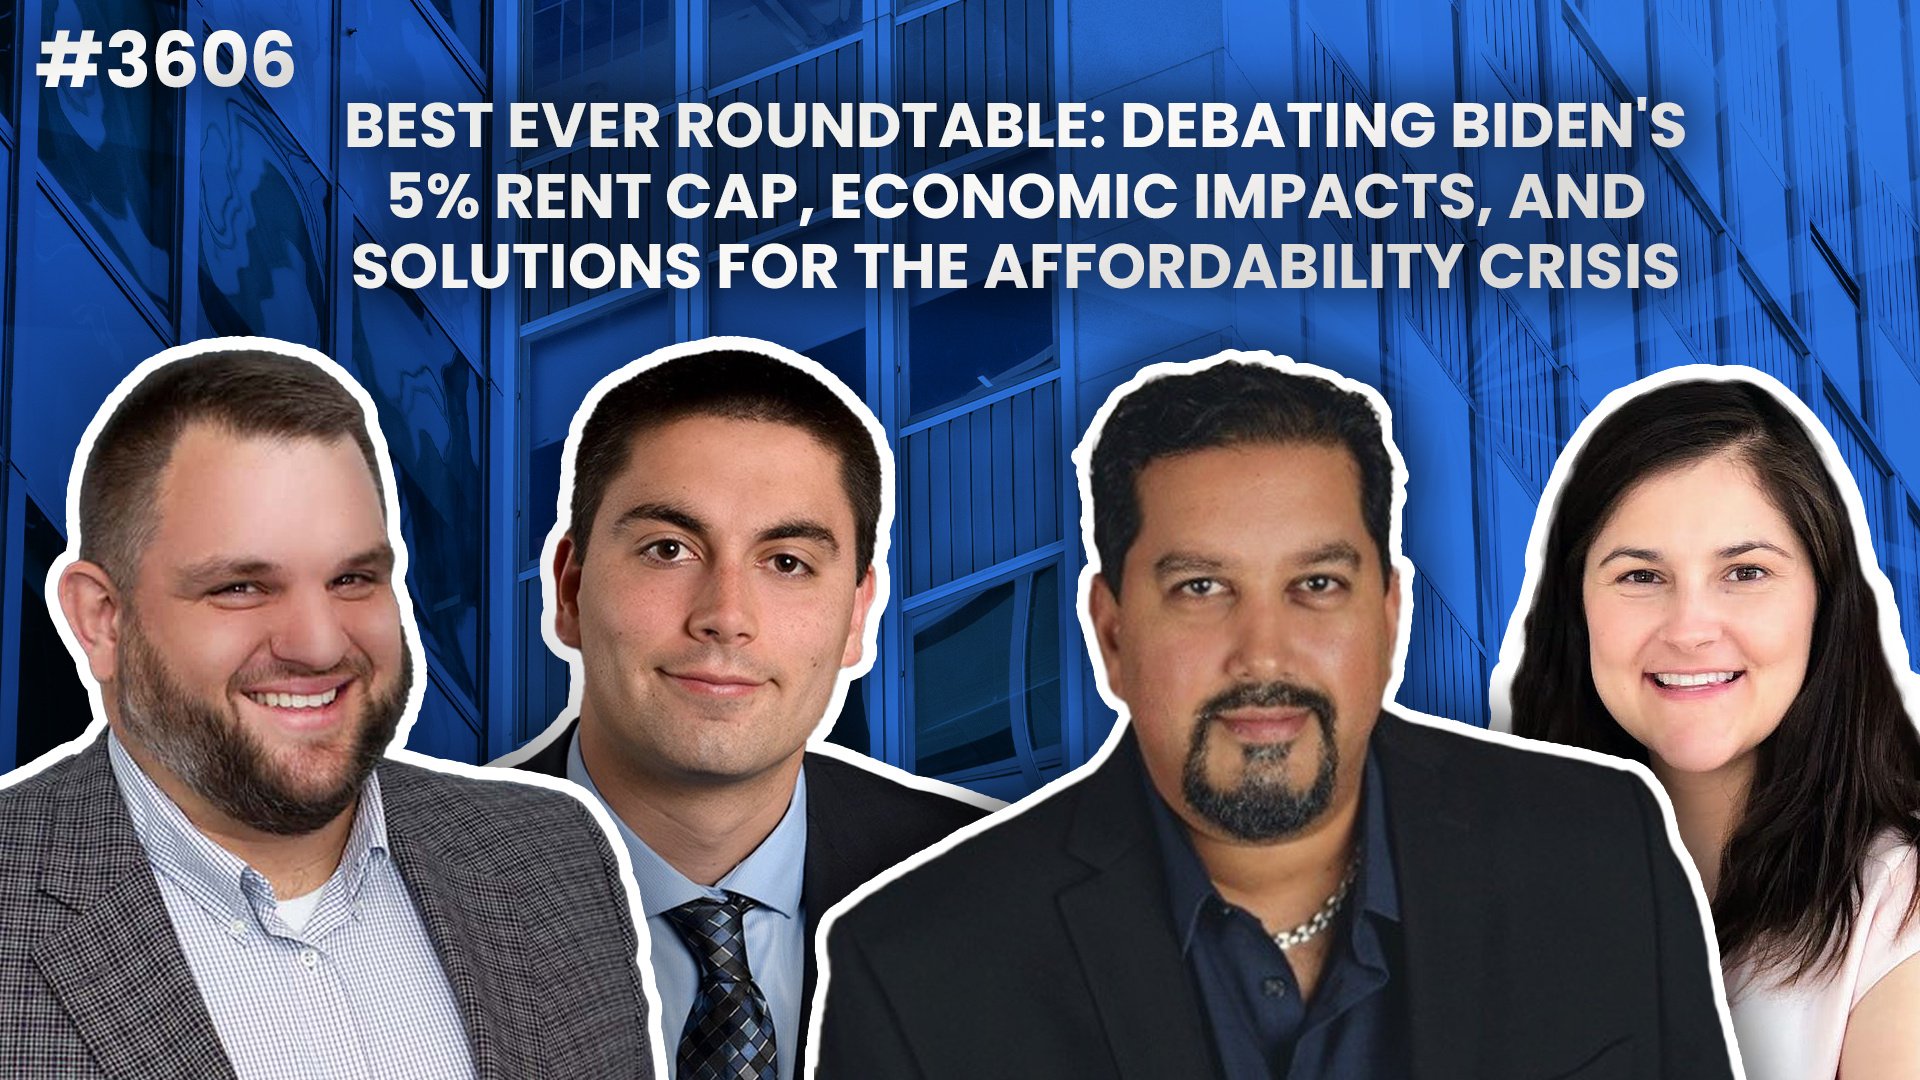 JF3606: Best Ever Roundtable: Debating Biden's 5% Rent Cap, Economic Impacts, and Solutions for the Affordability Crisis